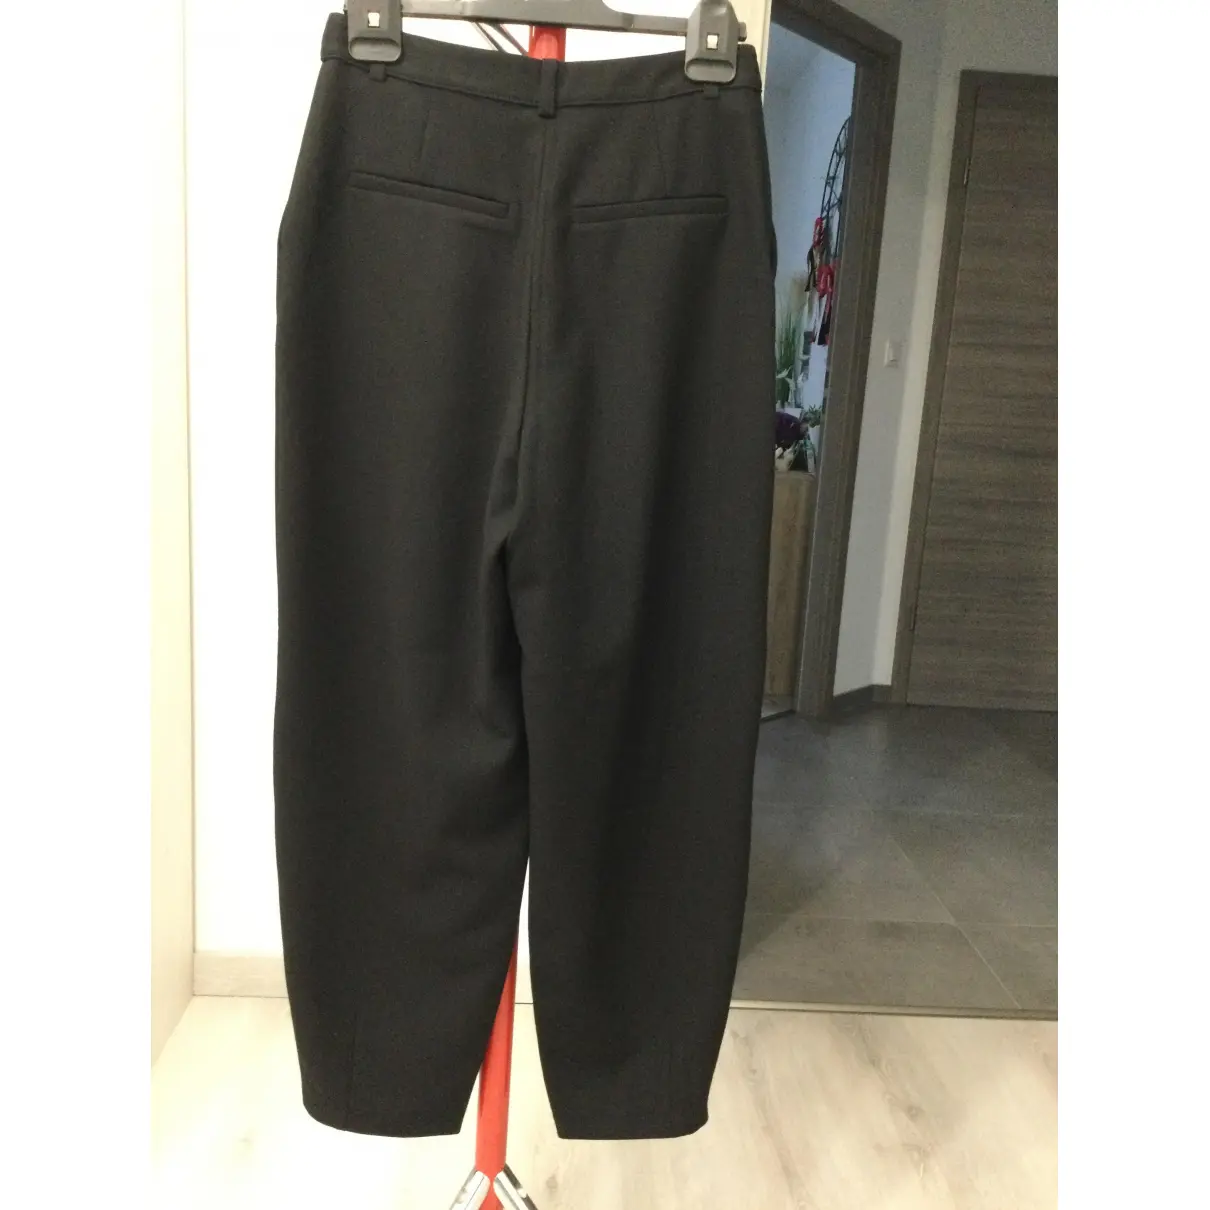 Buy Rich and royal Large pants online